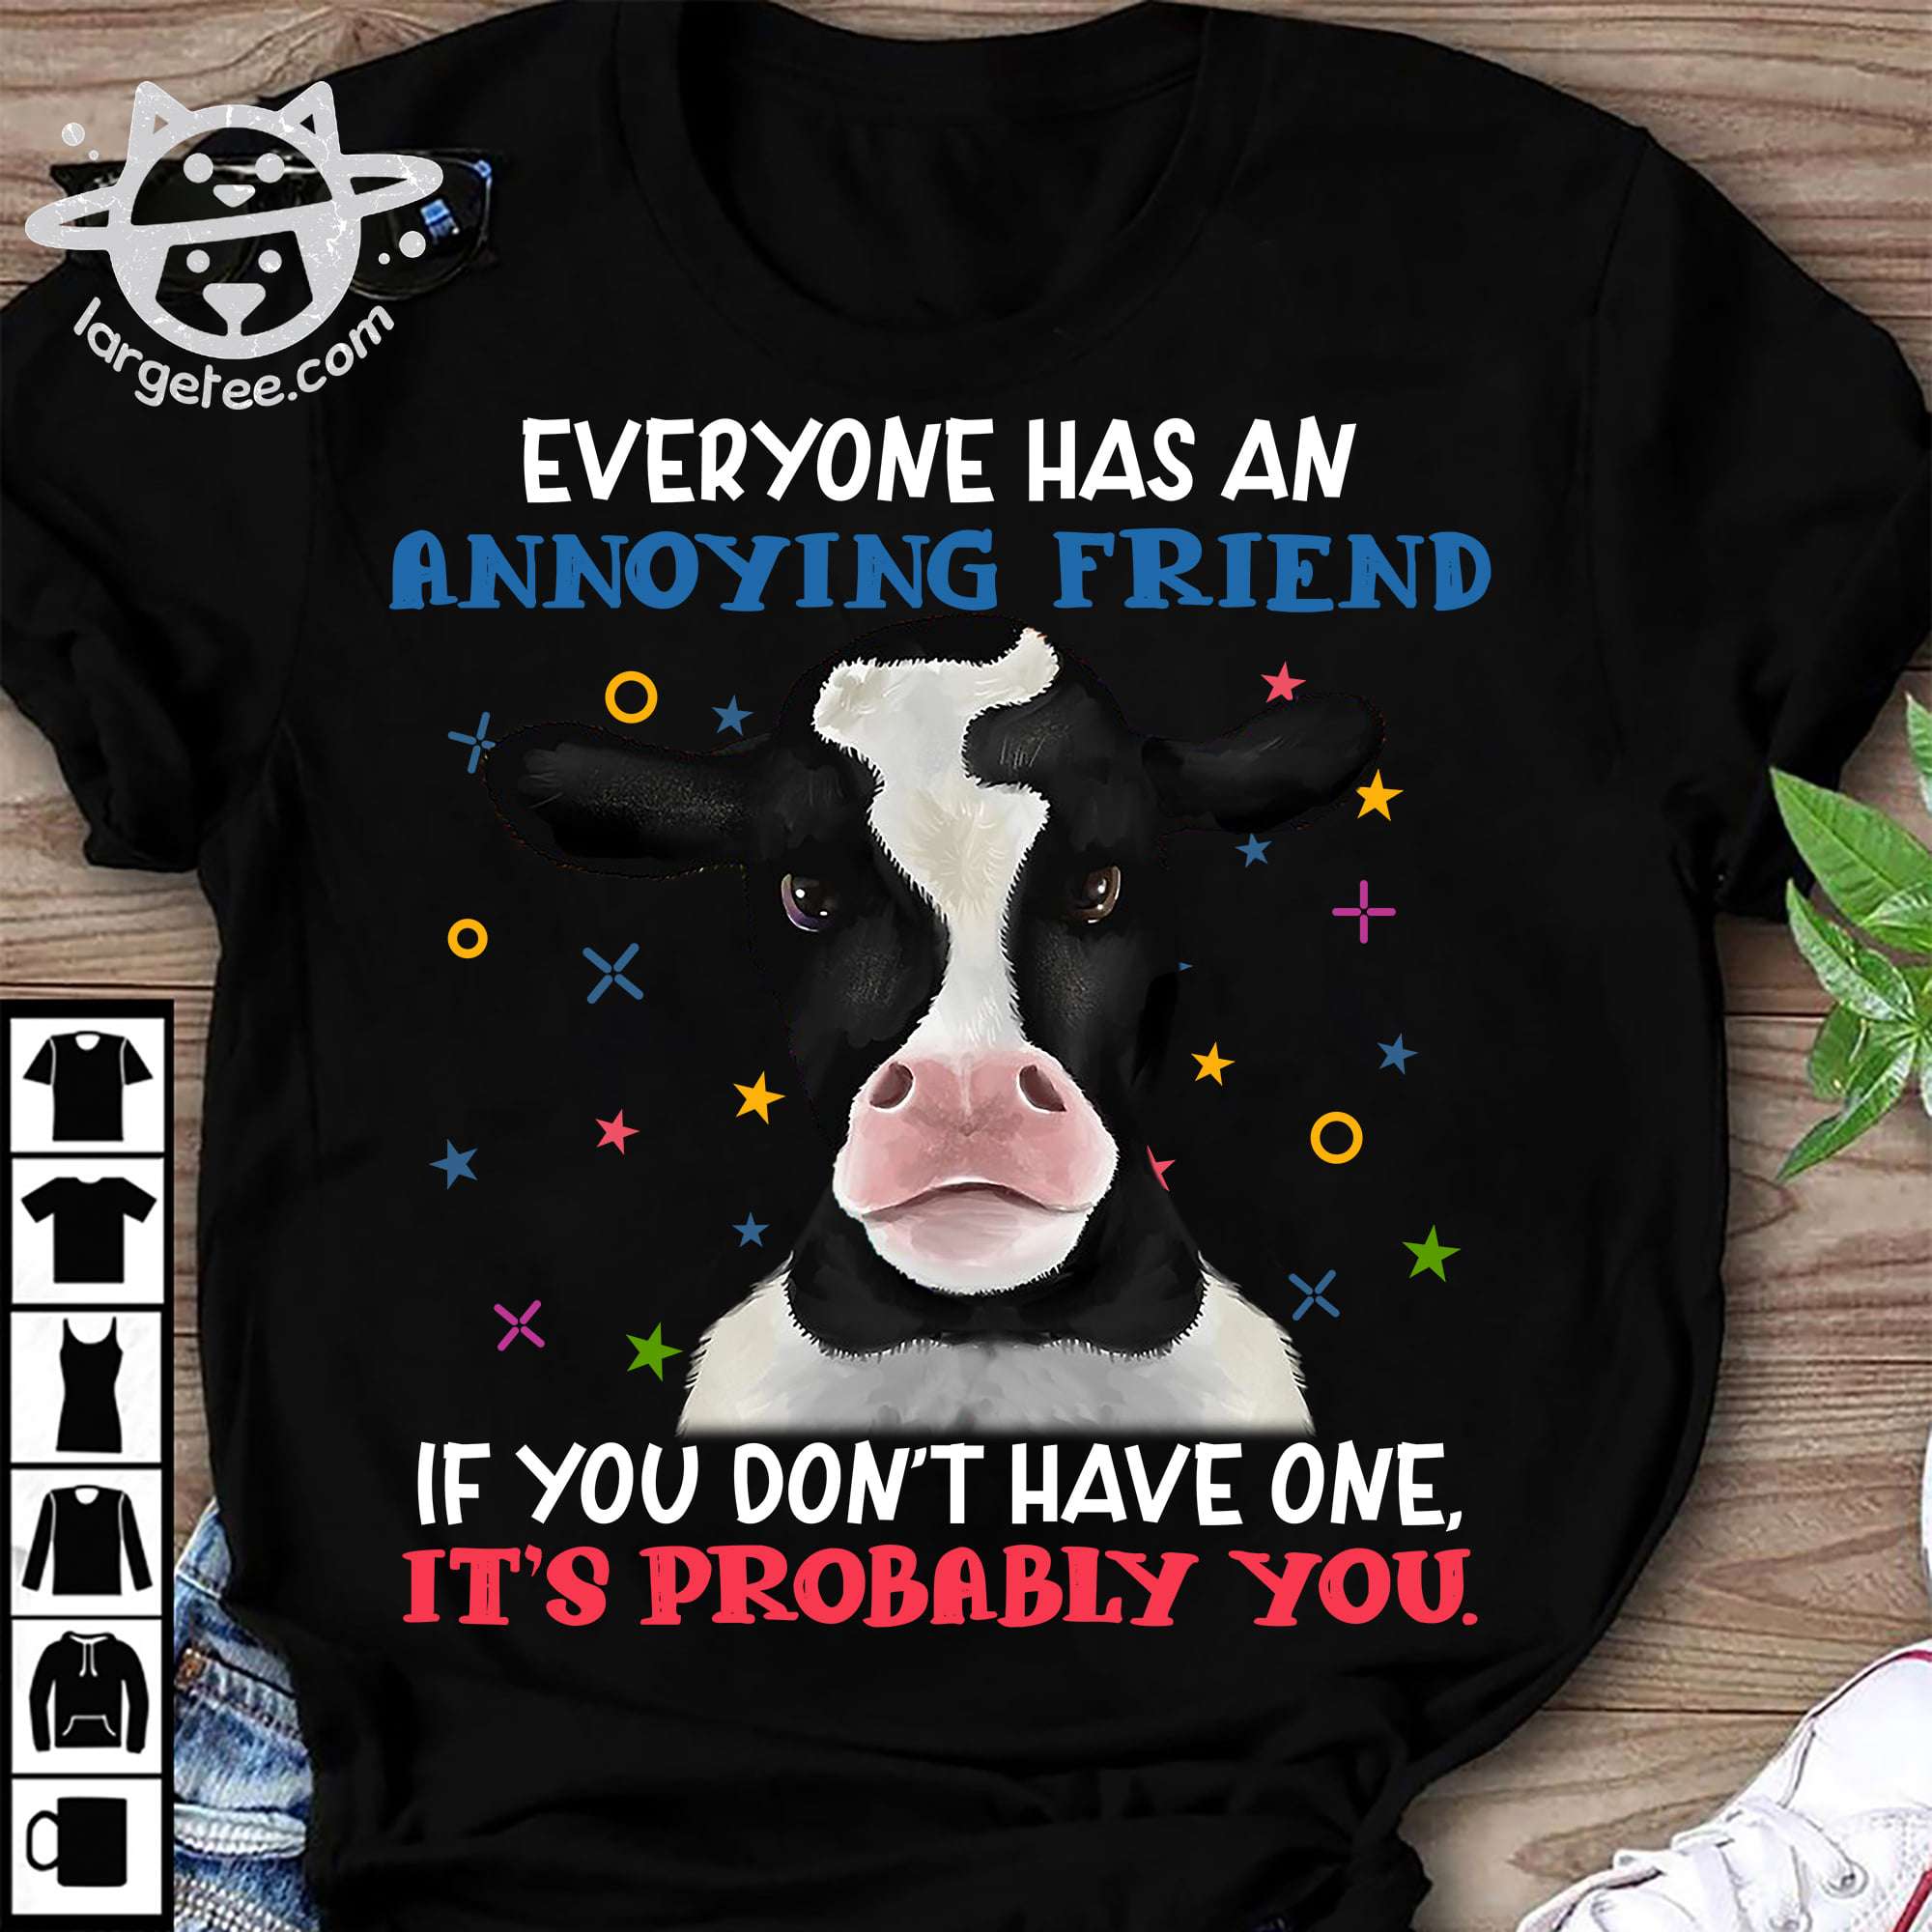 Little Dairy Cow, The dairy cow tees gift - Everyone has an annoying friend if you don't have one it's probably you